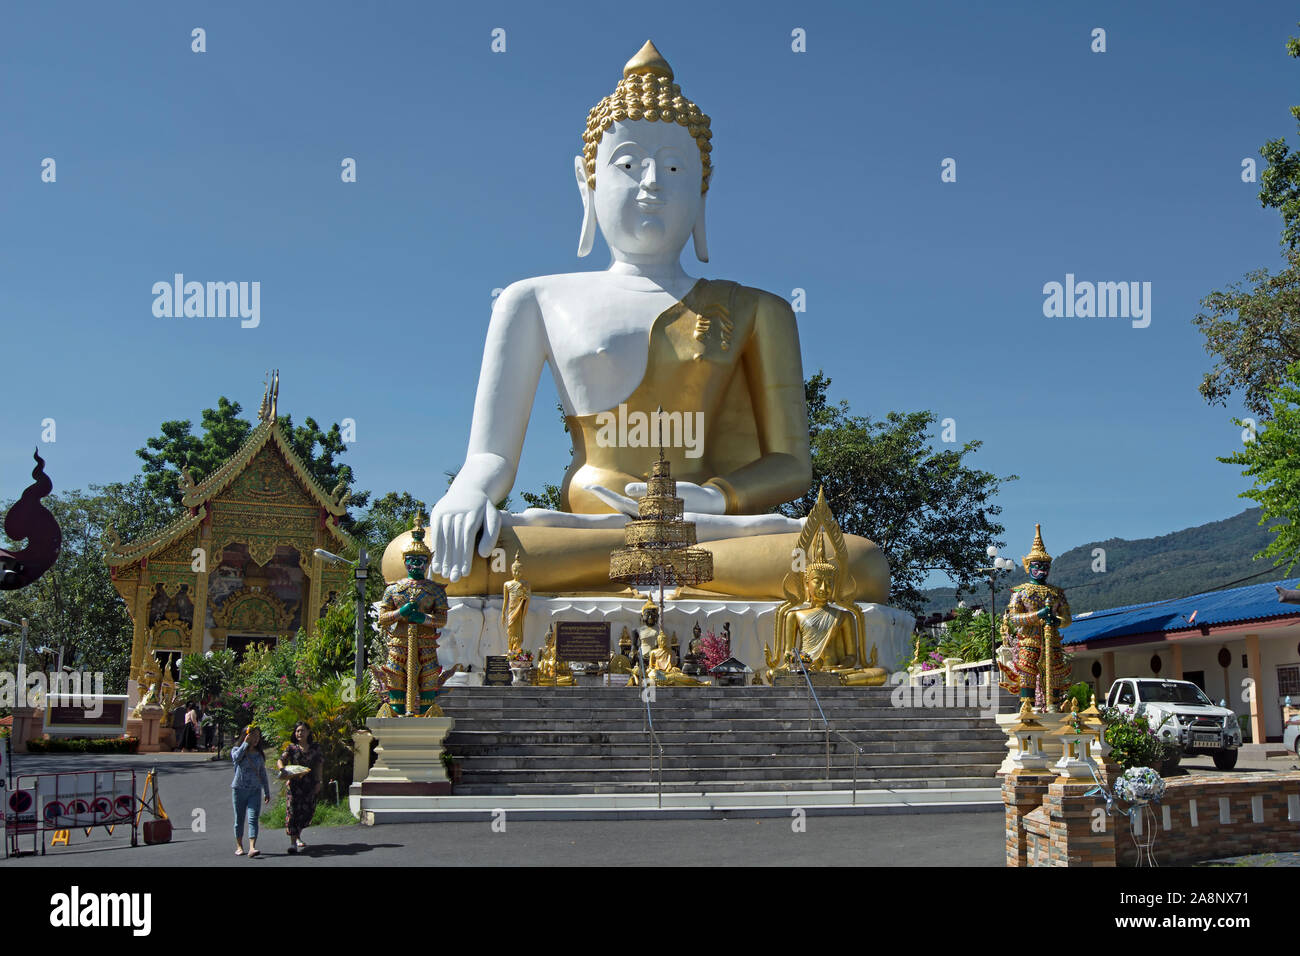 the 17-metre-high seated buddha figure at wat phra that doi kham, or golden temple, near chiang mai, northern thailand Stock Photo